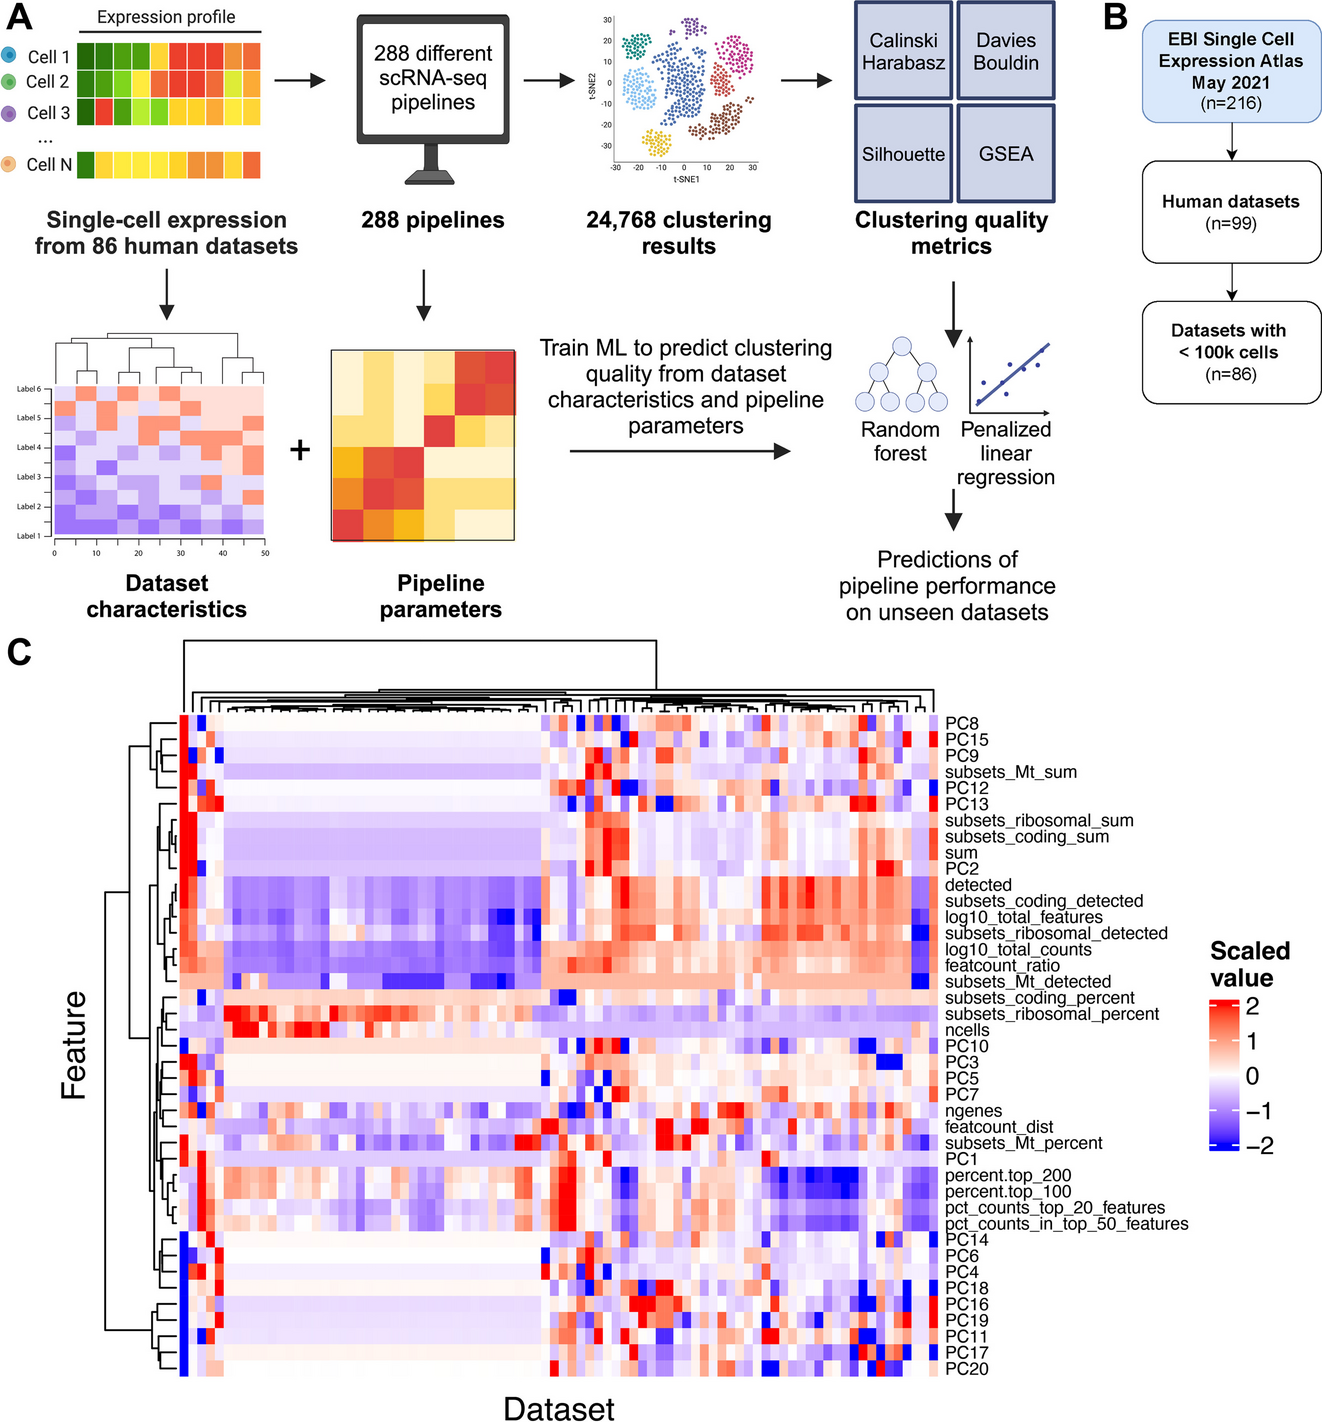 Beyond benchmarking and towards predictive models of dataset-specific single-cell RNA-seq pipeline performance